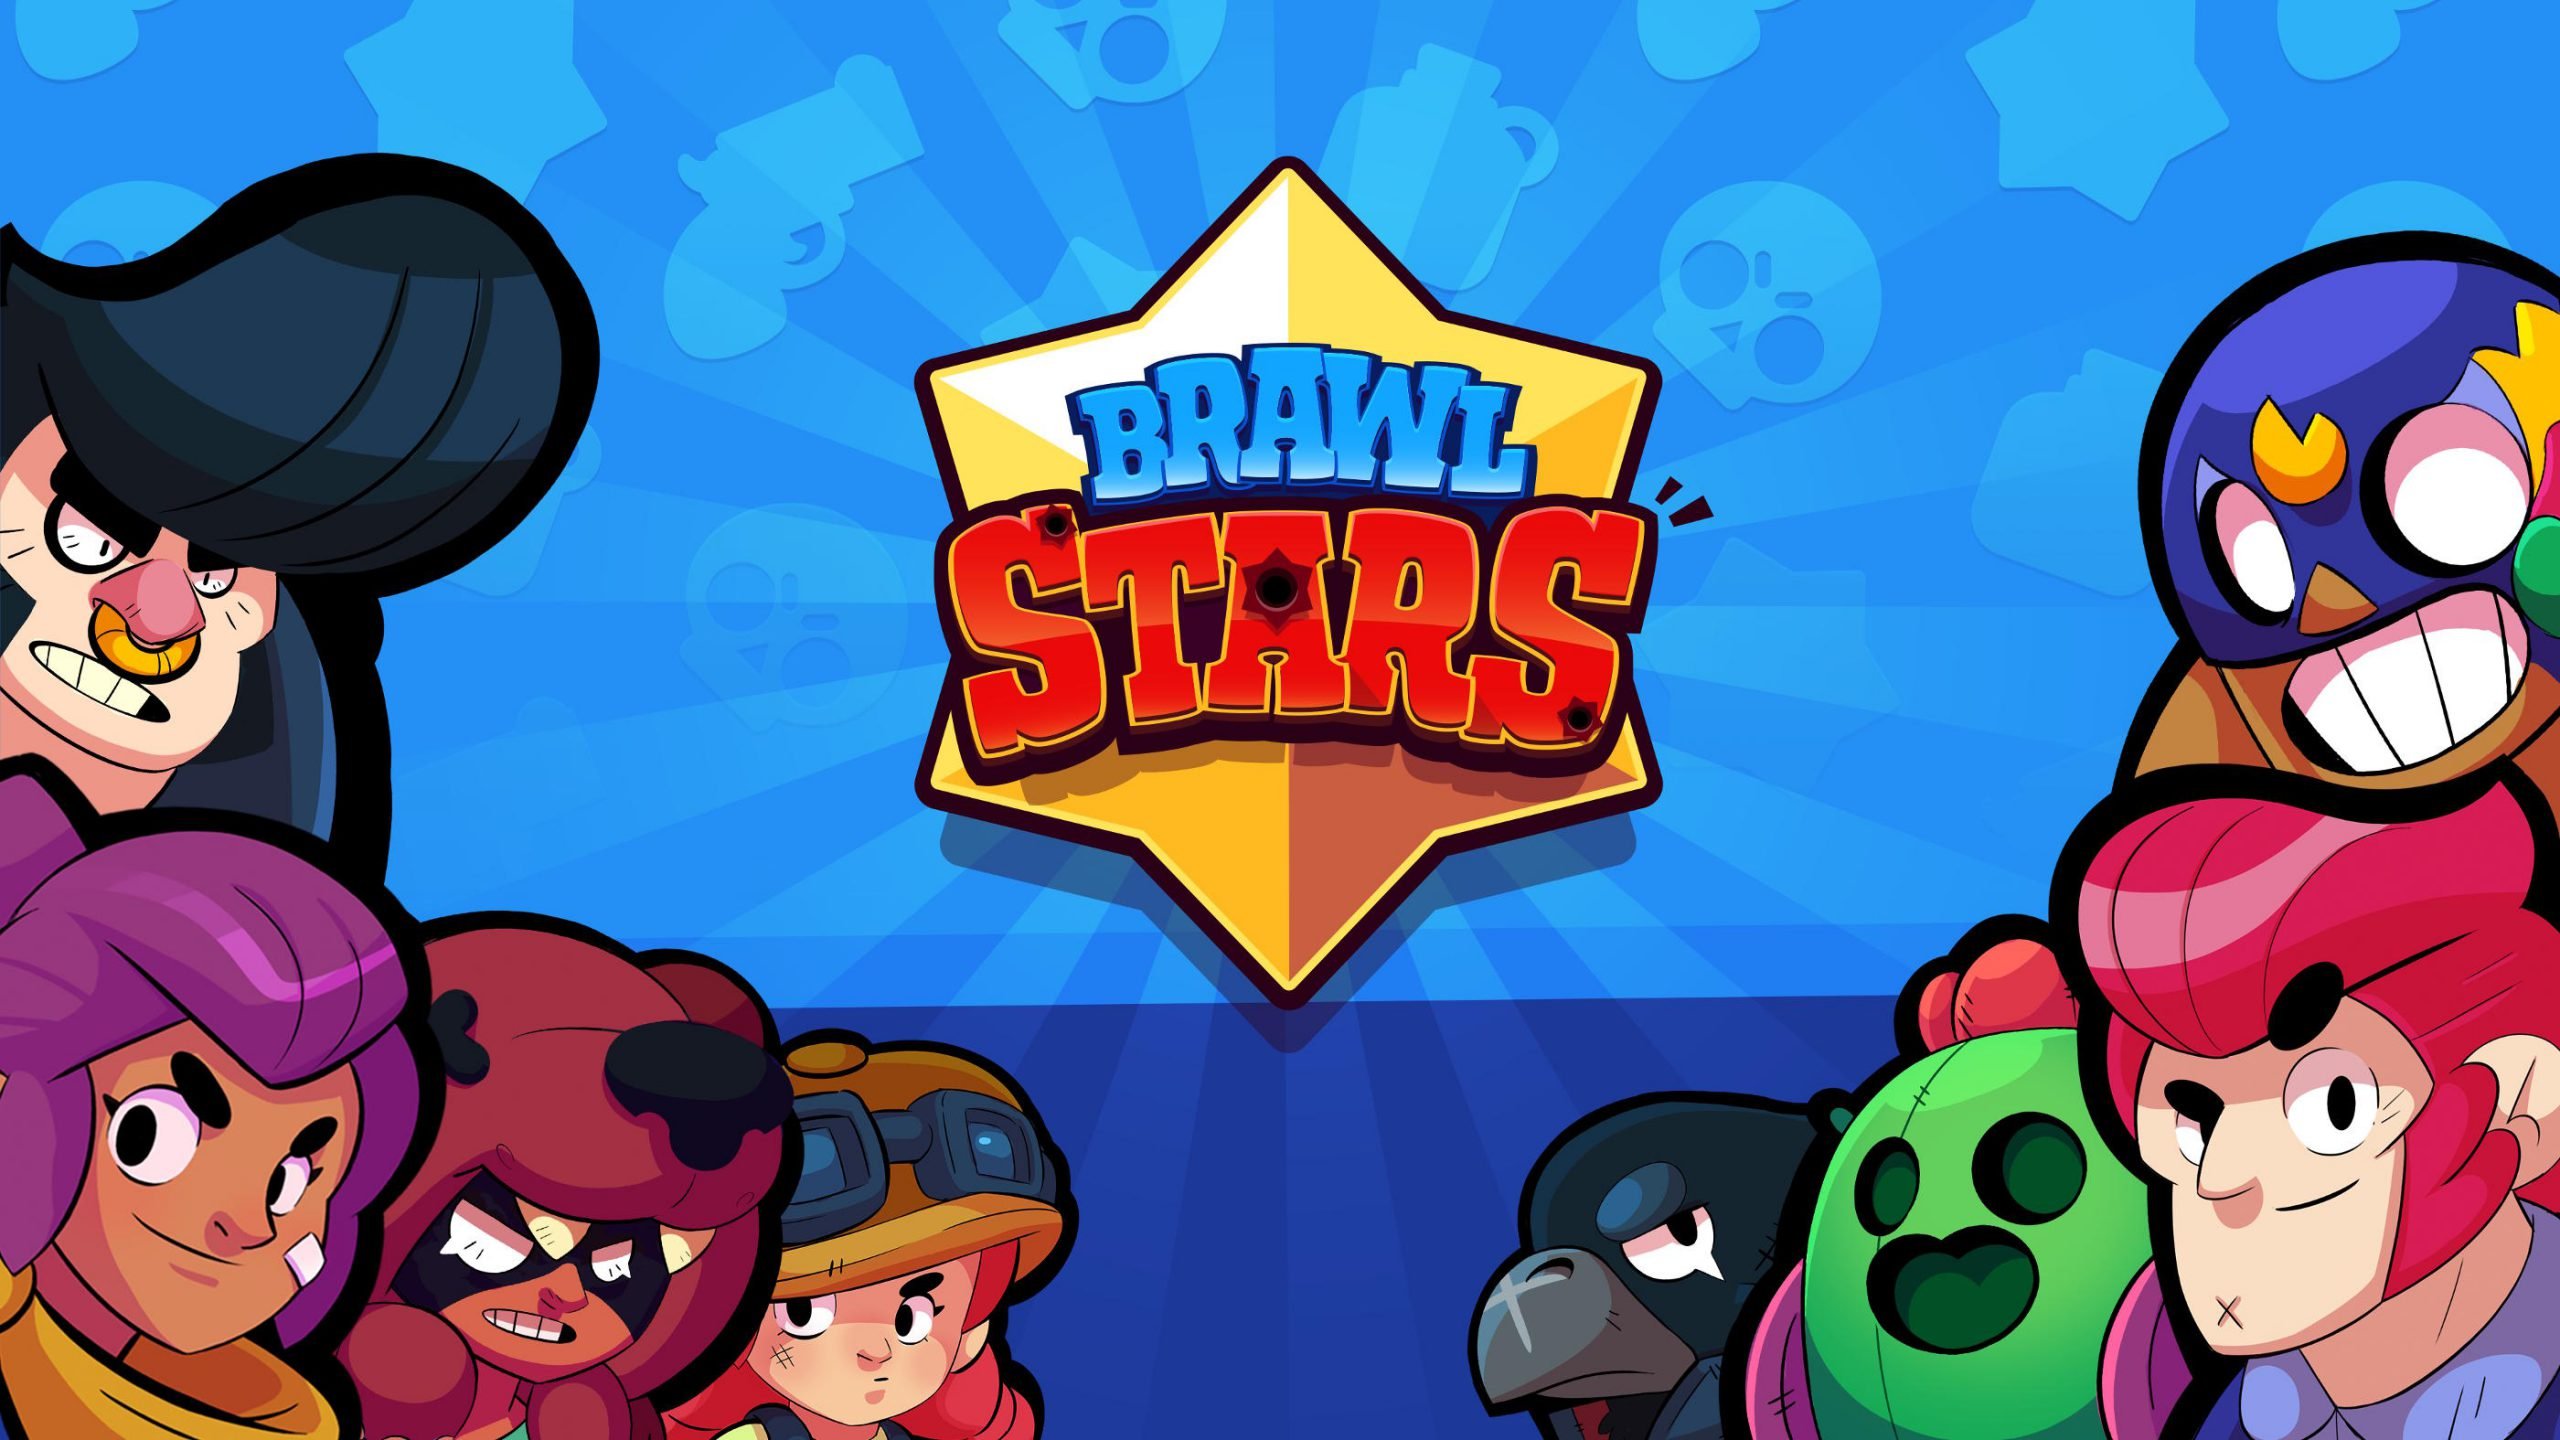 Everything You Need to Know About Brawl Stars’ Latest Update